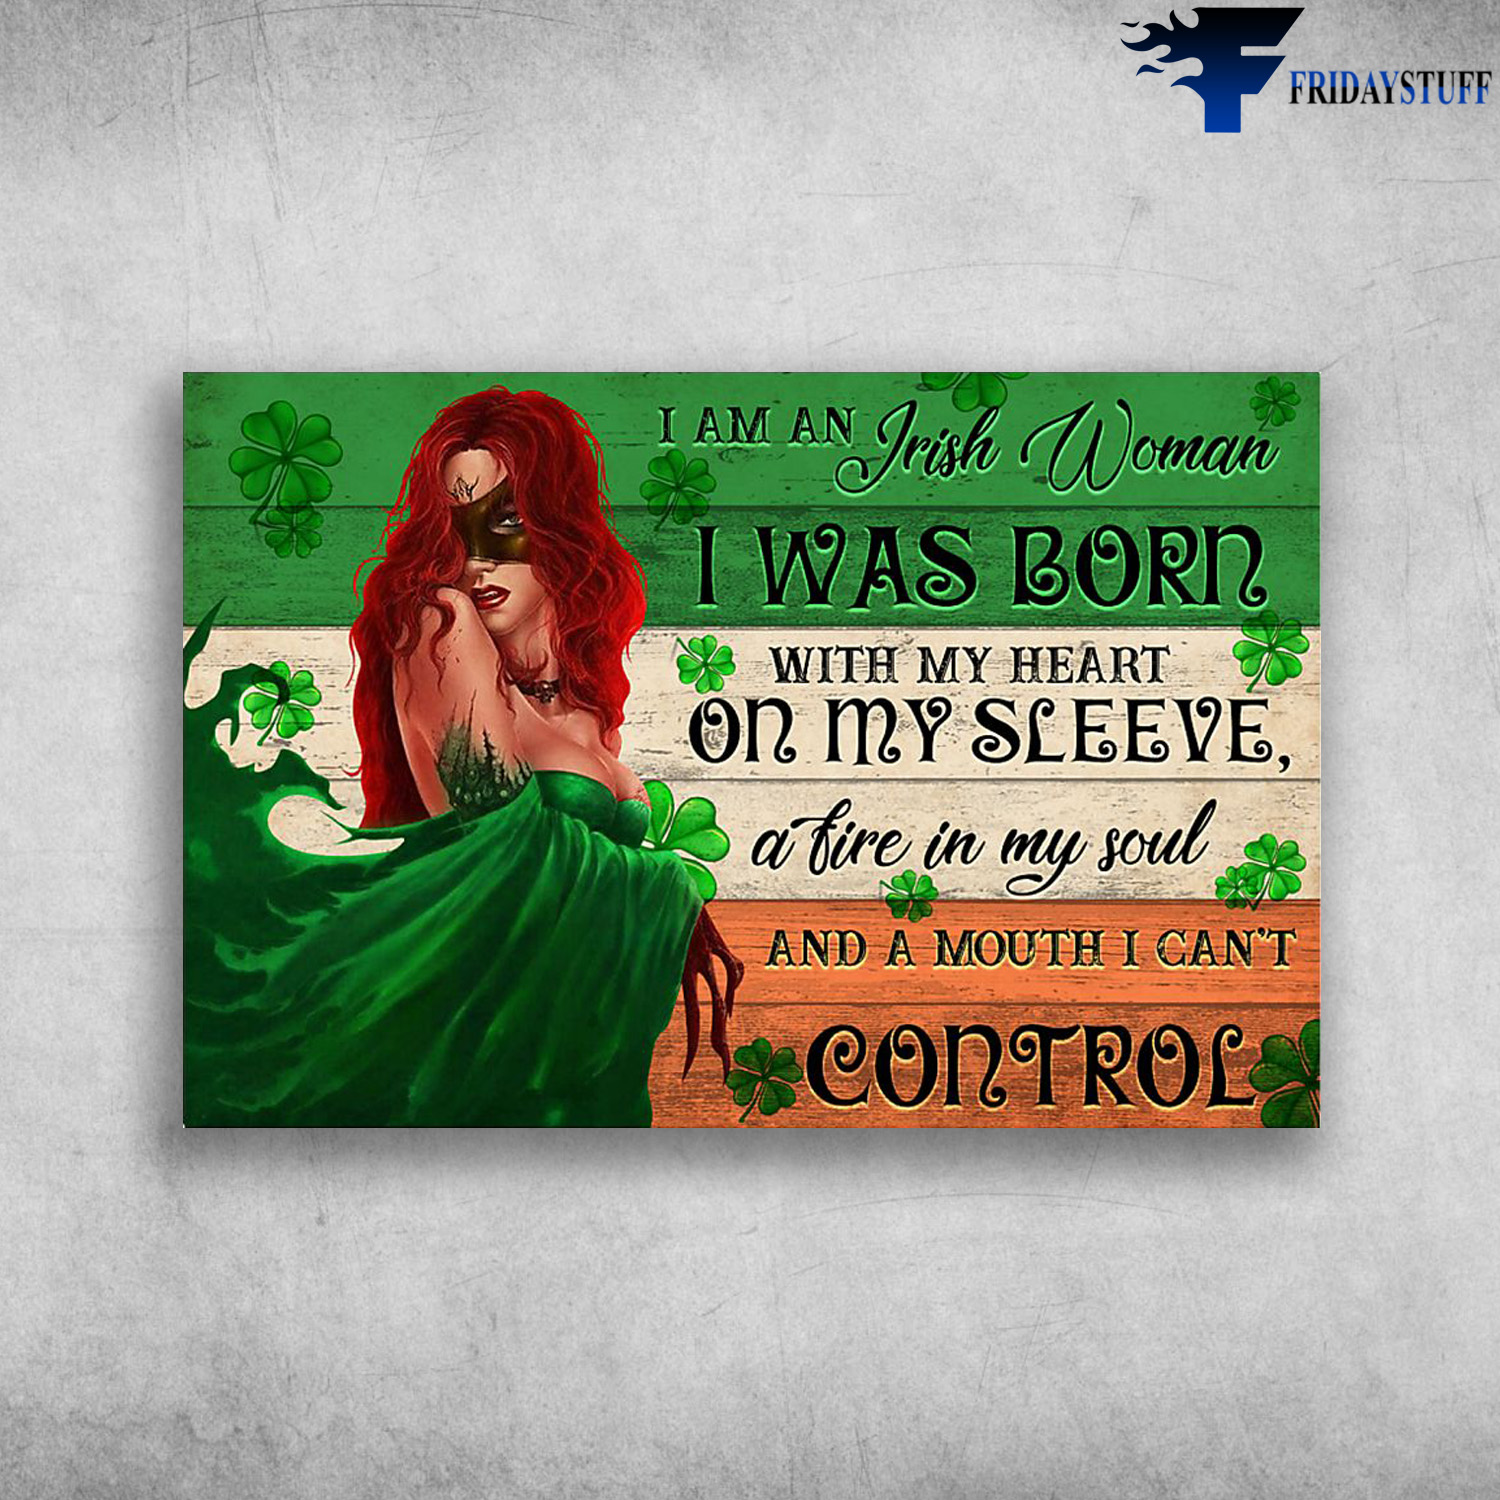 Irish Woman - I Am An Irish Woman, I Was Born With My Heart On My Sleeve, A Fire In My Soul, And A Mouth I Can't Control, Saint Patrick’s Day, Irish, Patriots’ Day